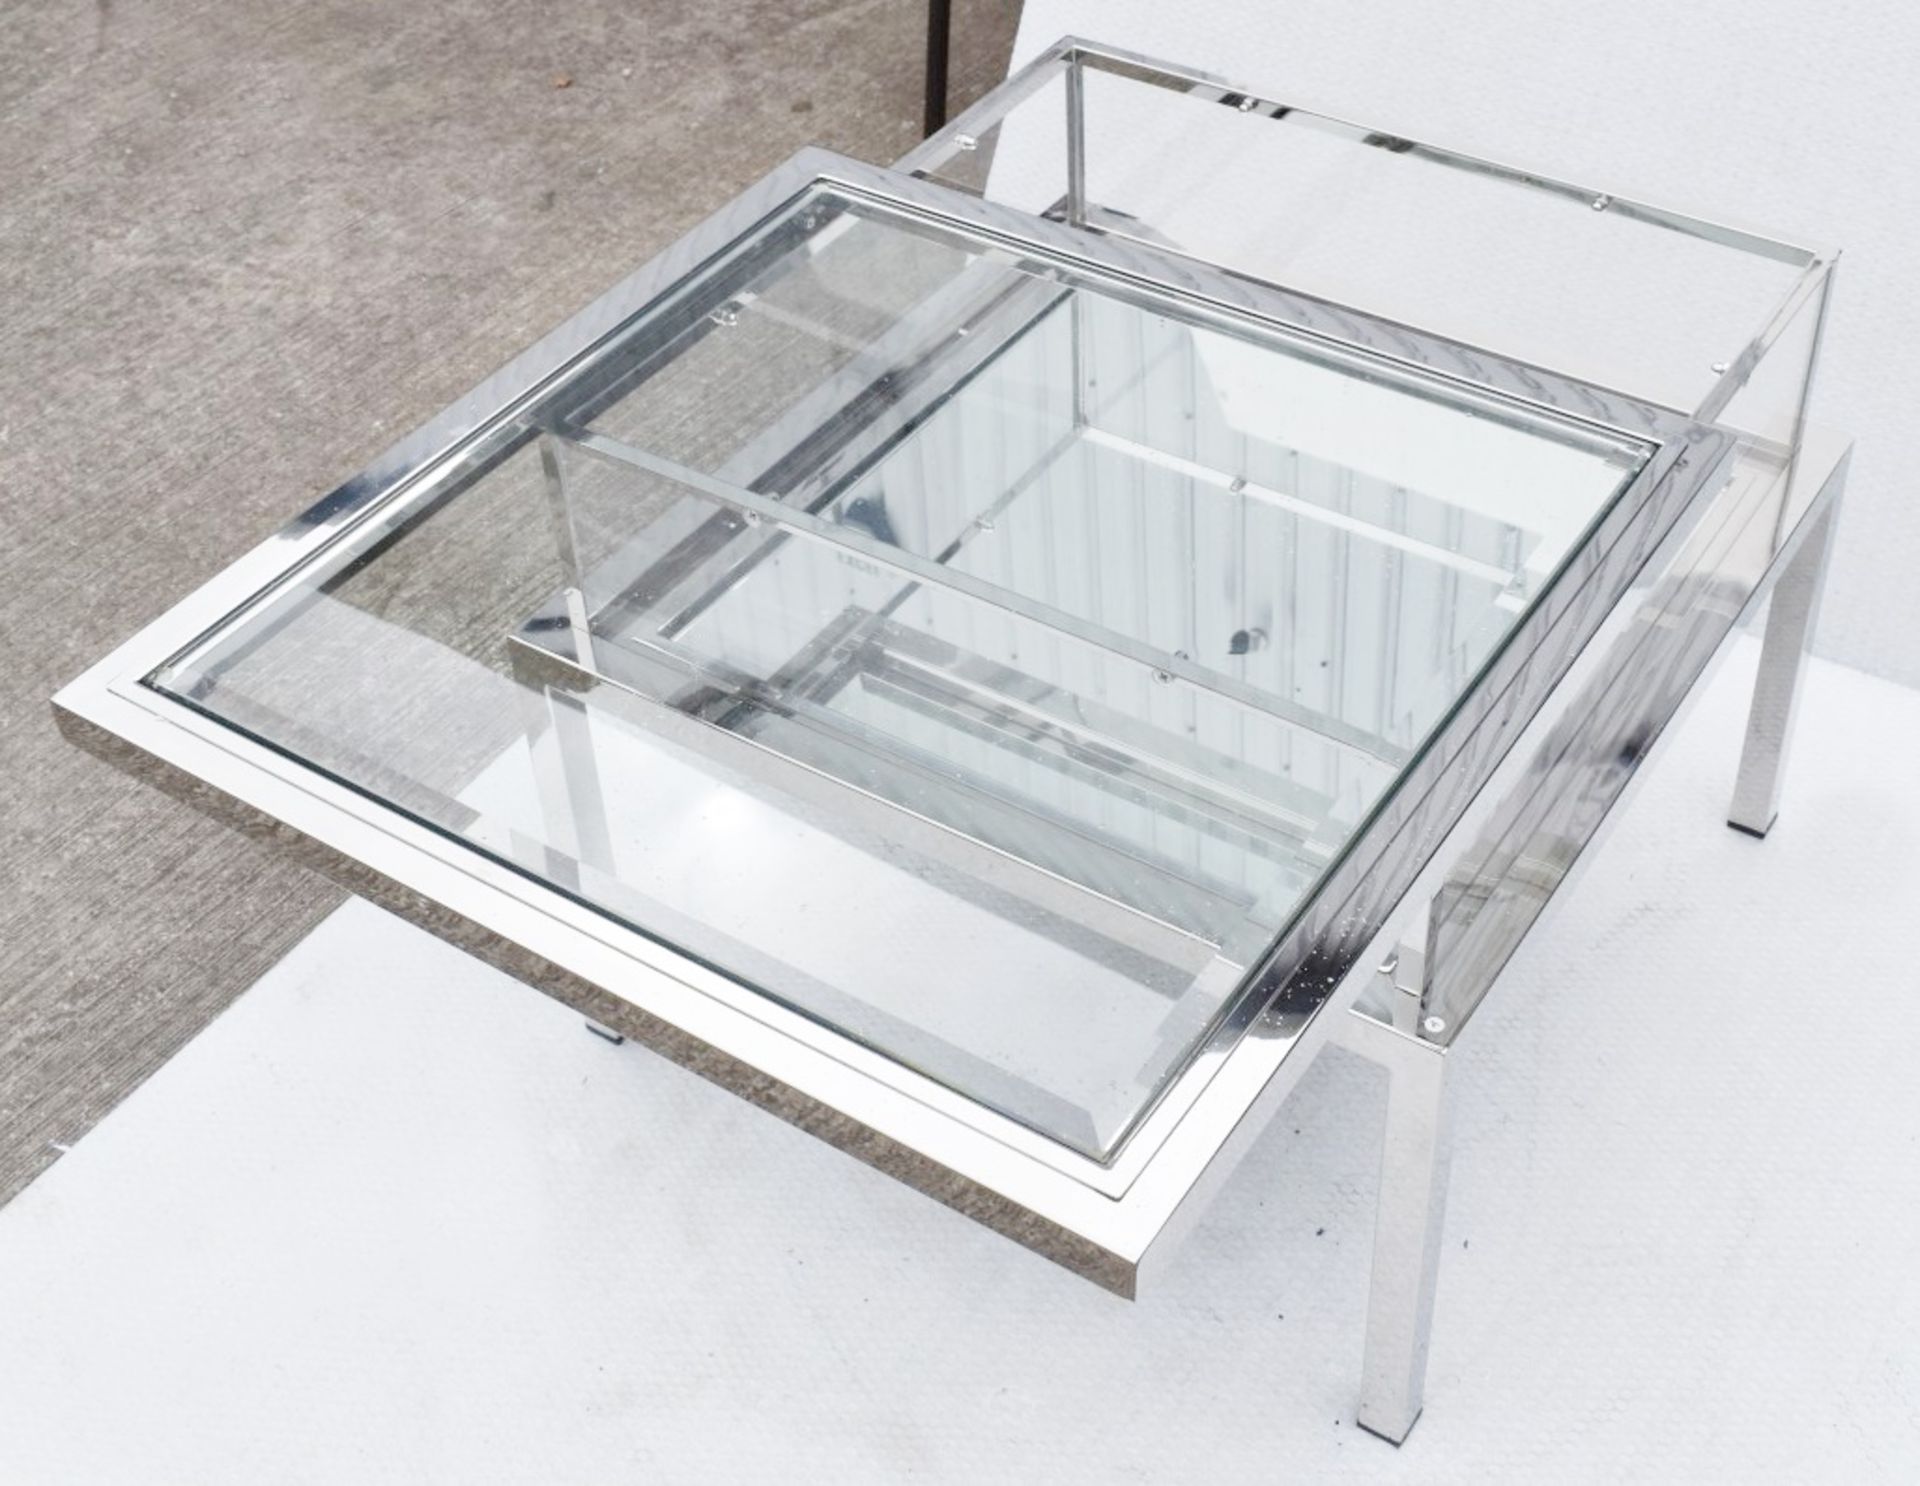 1 x EICHHOLTZ Glass Topped Side Table Harvey With A Polished Steel Frame - Image 4 of 5